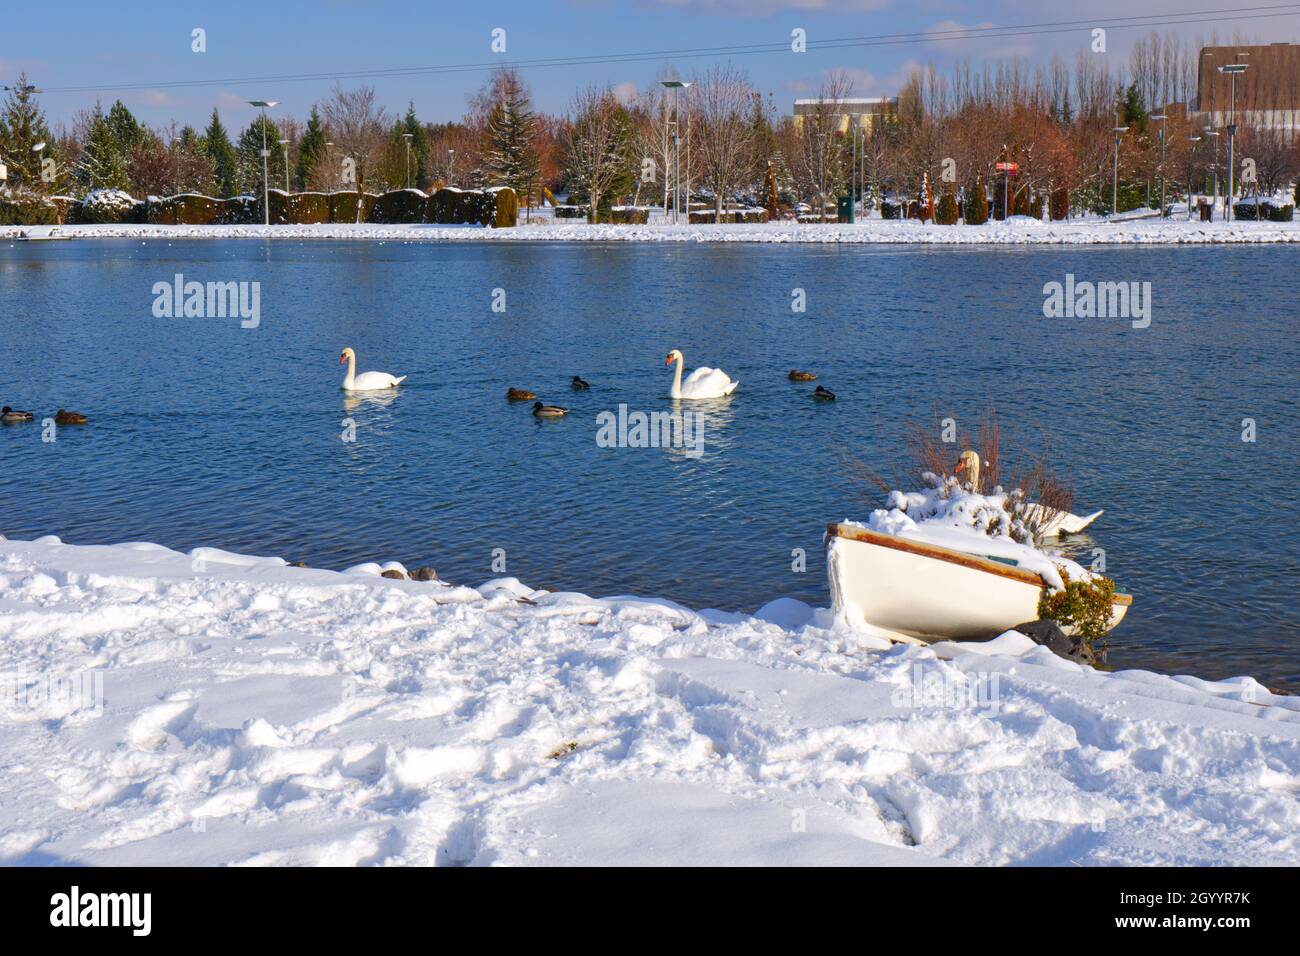 Small wooden rowing boat at lakeside under snow while white swans swim at lake at the background Stock Photo